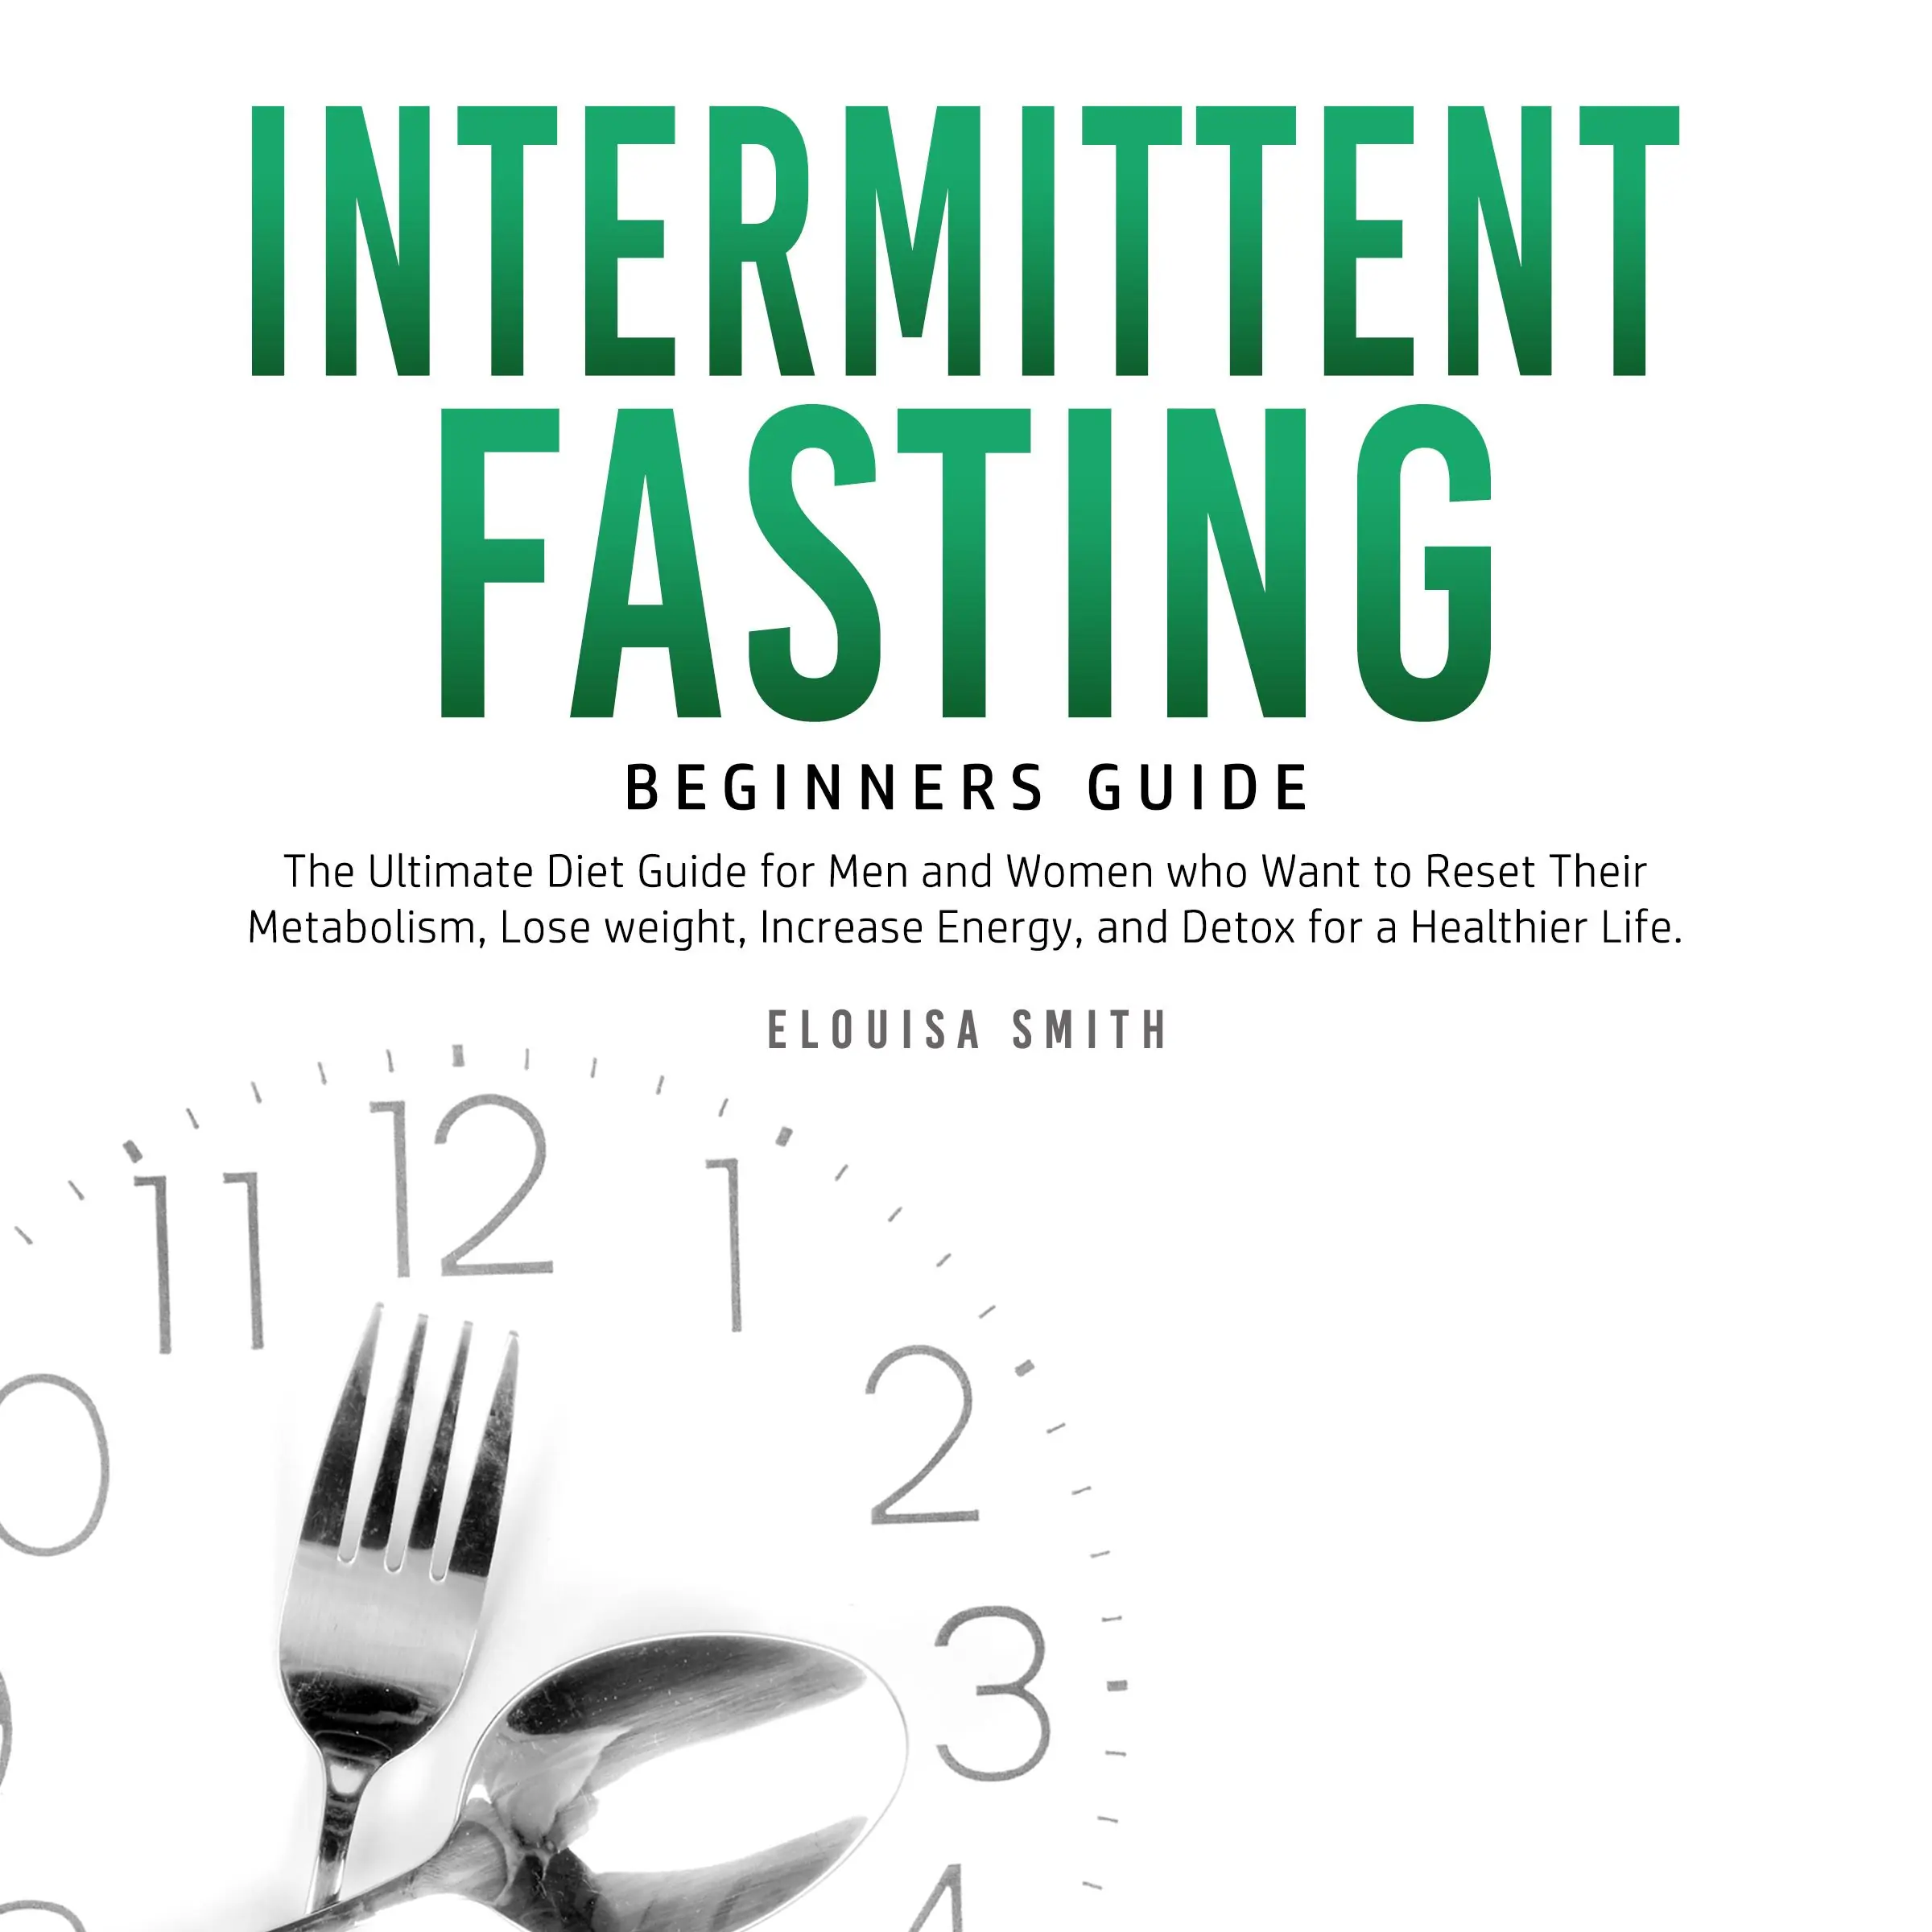 Intermittent Fasting — Beginners Guide: The Ultimate Diet Guide for Men and Women who Want to Reset Their Metabolism, Lose Weight, Increase Energy, and Detox for a Healthier Life Audiobook by Elouisa Smith